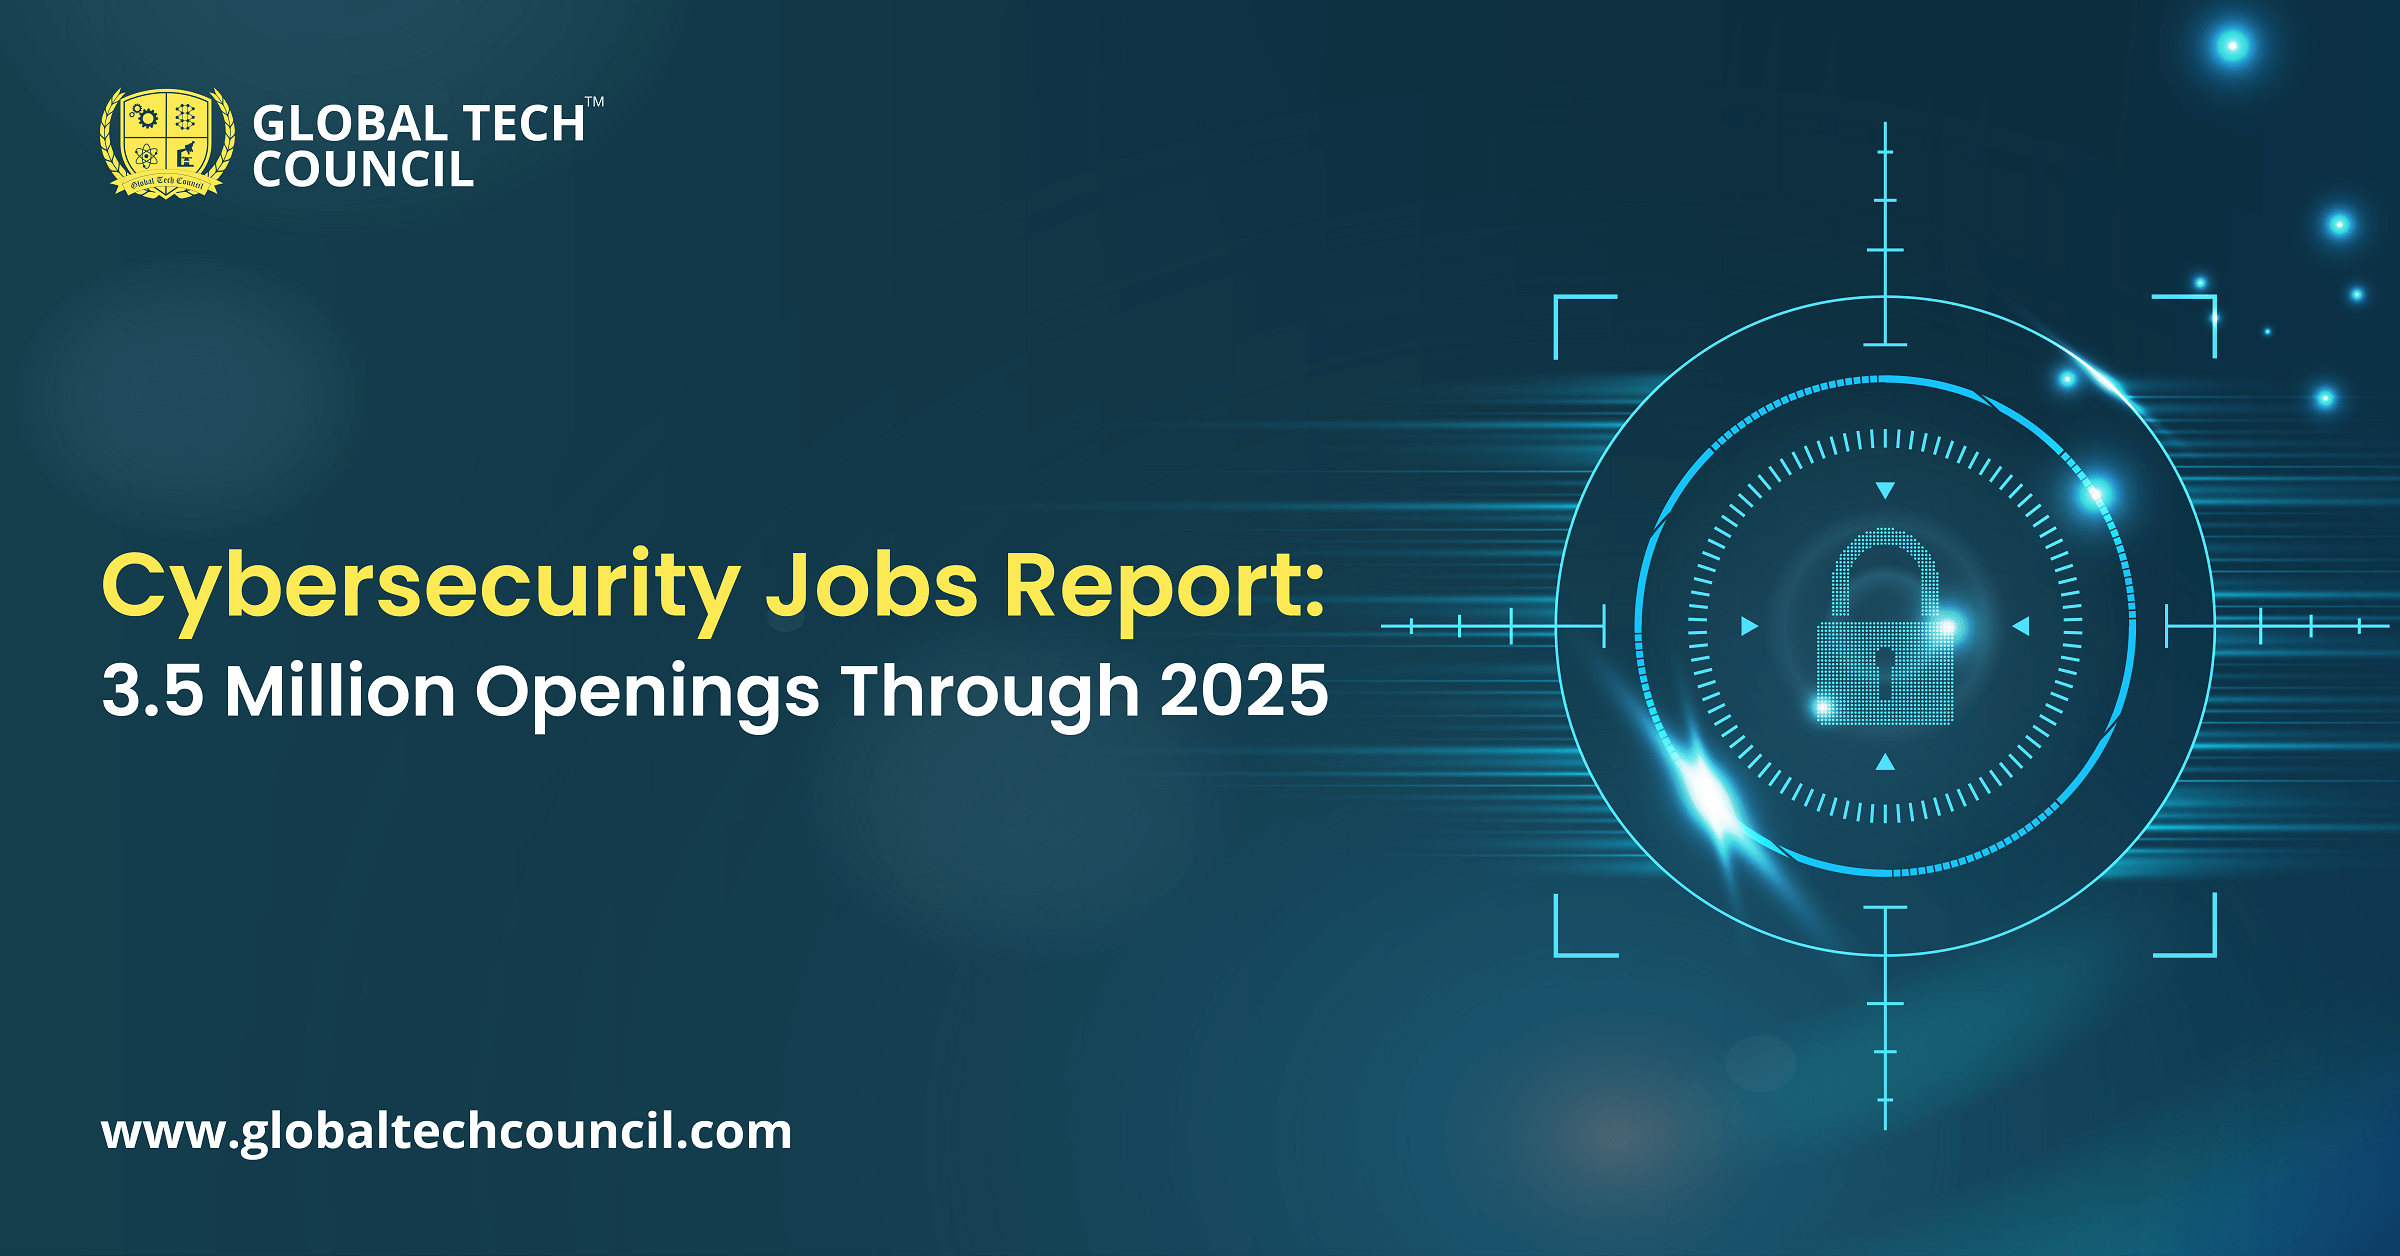 Cybersecurity Jobs Report 3.5 Million Openings Through 2025